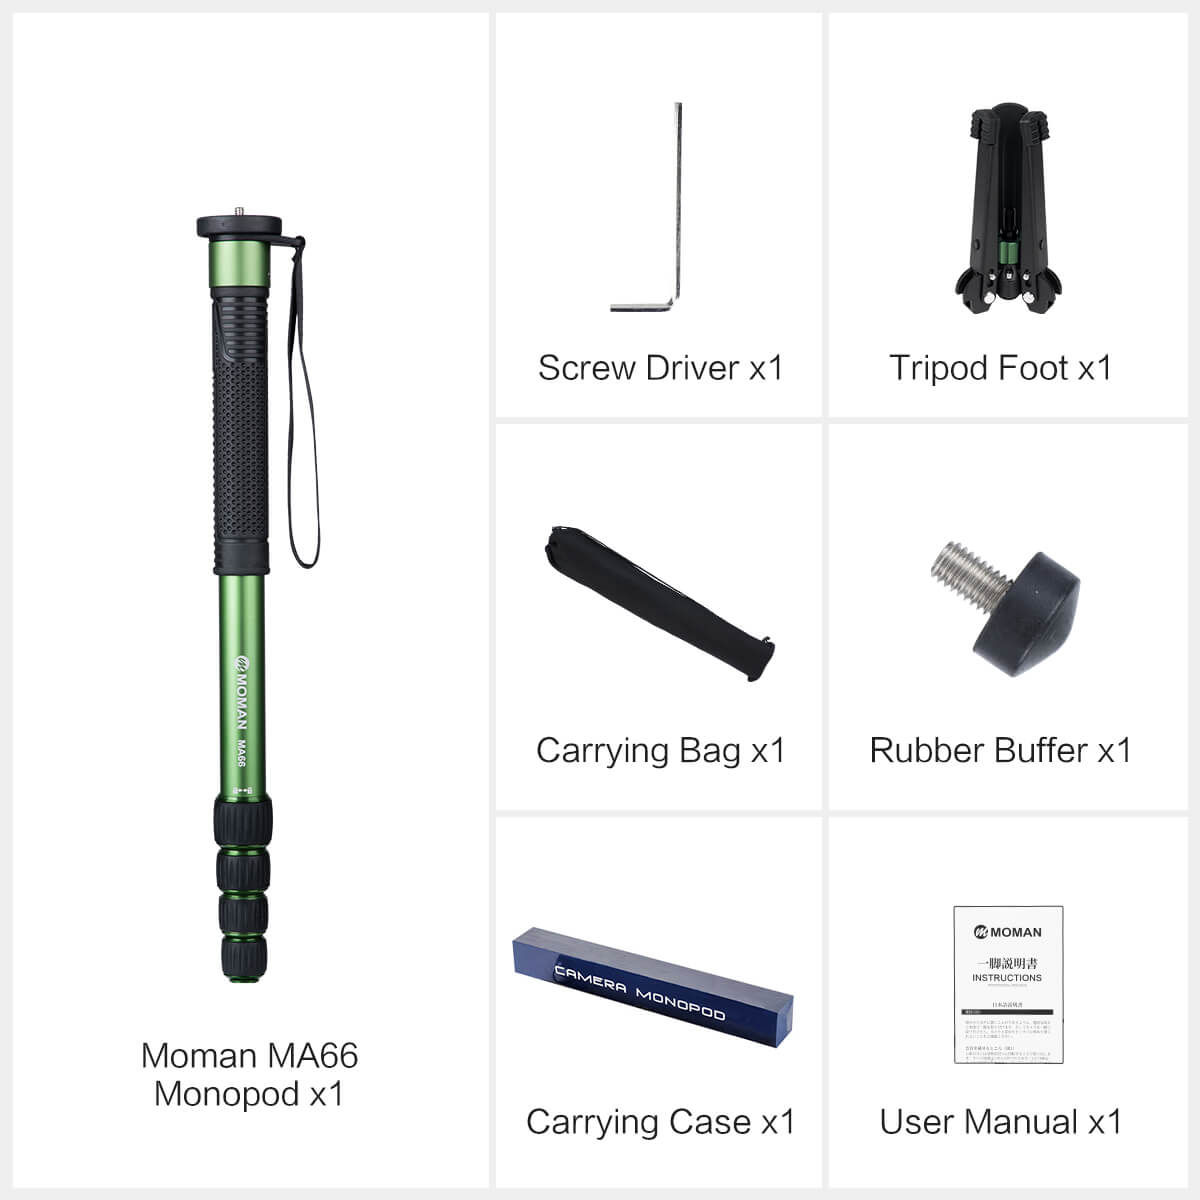 Moman MA66's package includes a monopod, a tripod foot, a carrying bag & a case, a screw driver, and more.